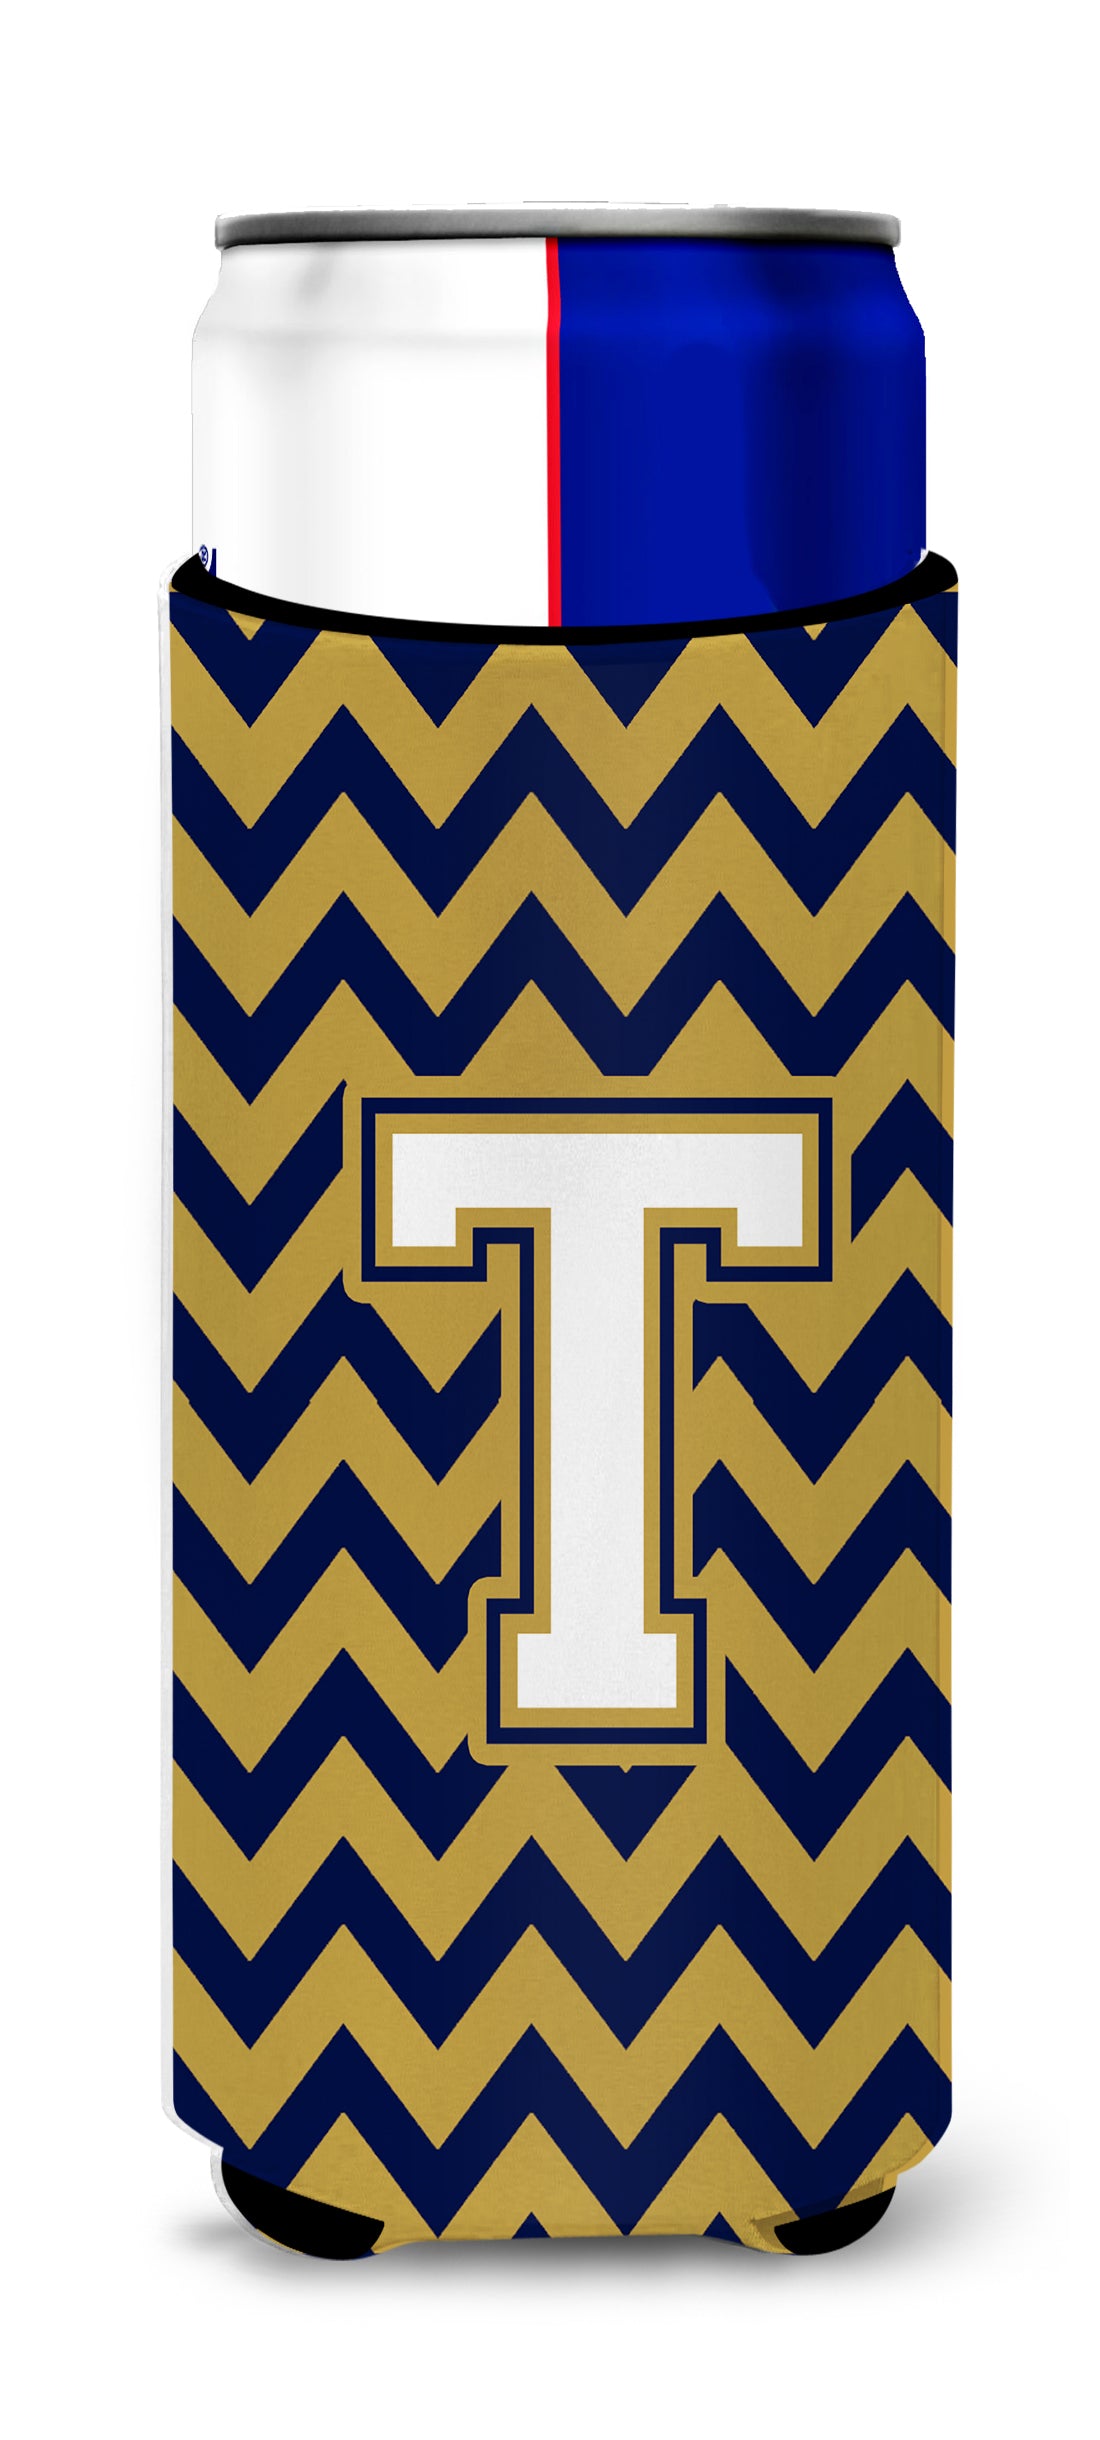 Letter T Chevron Navy Blue and Gold Ultra Beverage Insulators for slim cans CJ1057-TMUK.